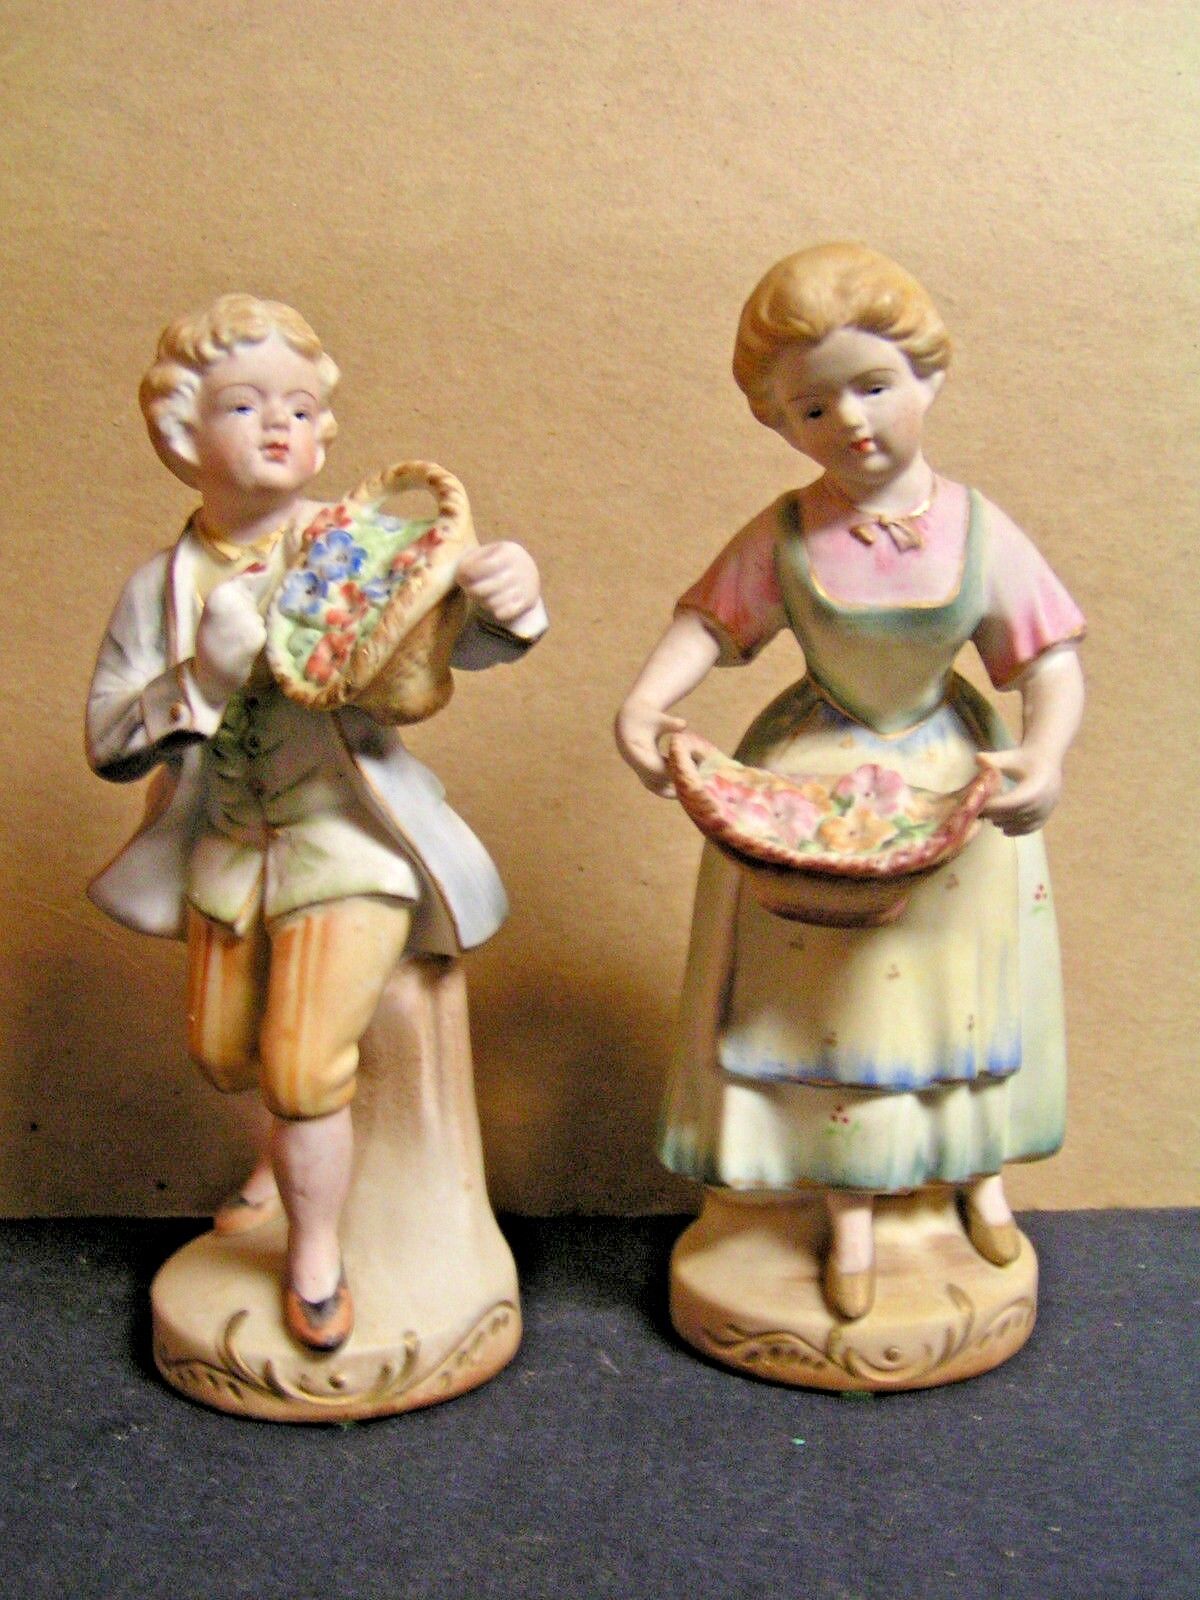 VICTORIAN PORCELAIN  BOY AND GIRL HOLDING BASKETS FIGURINES  MINT 